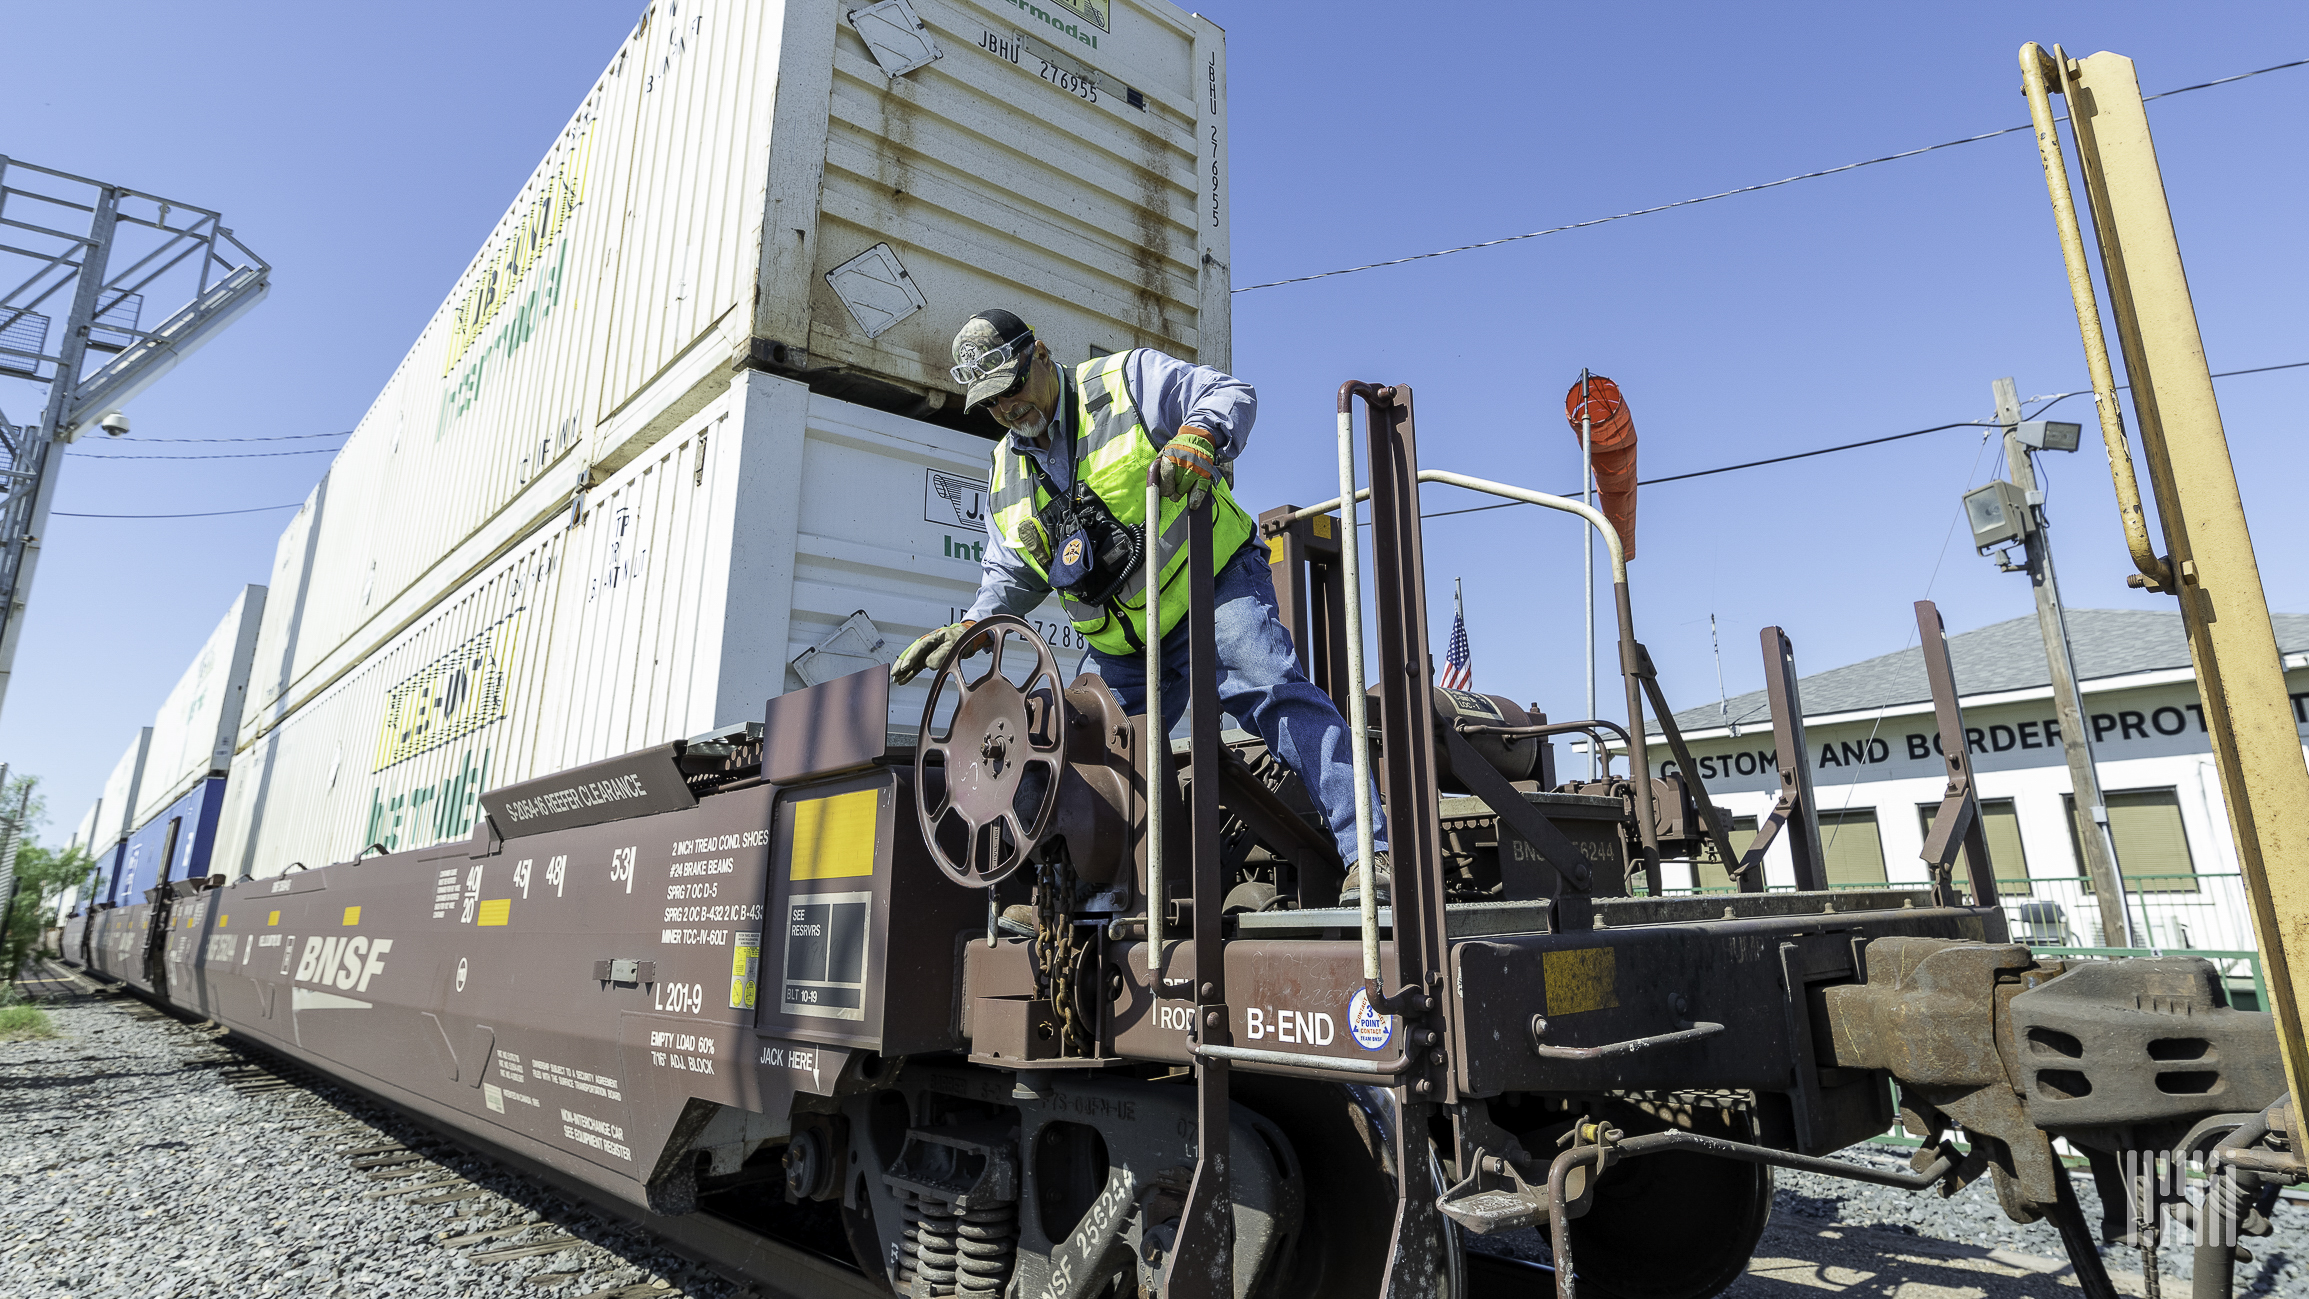 A man inspects a railcar carrying an intermodal container.